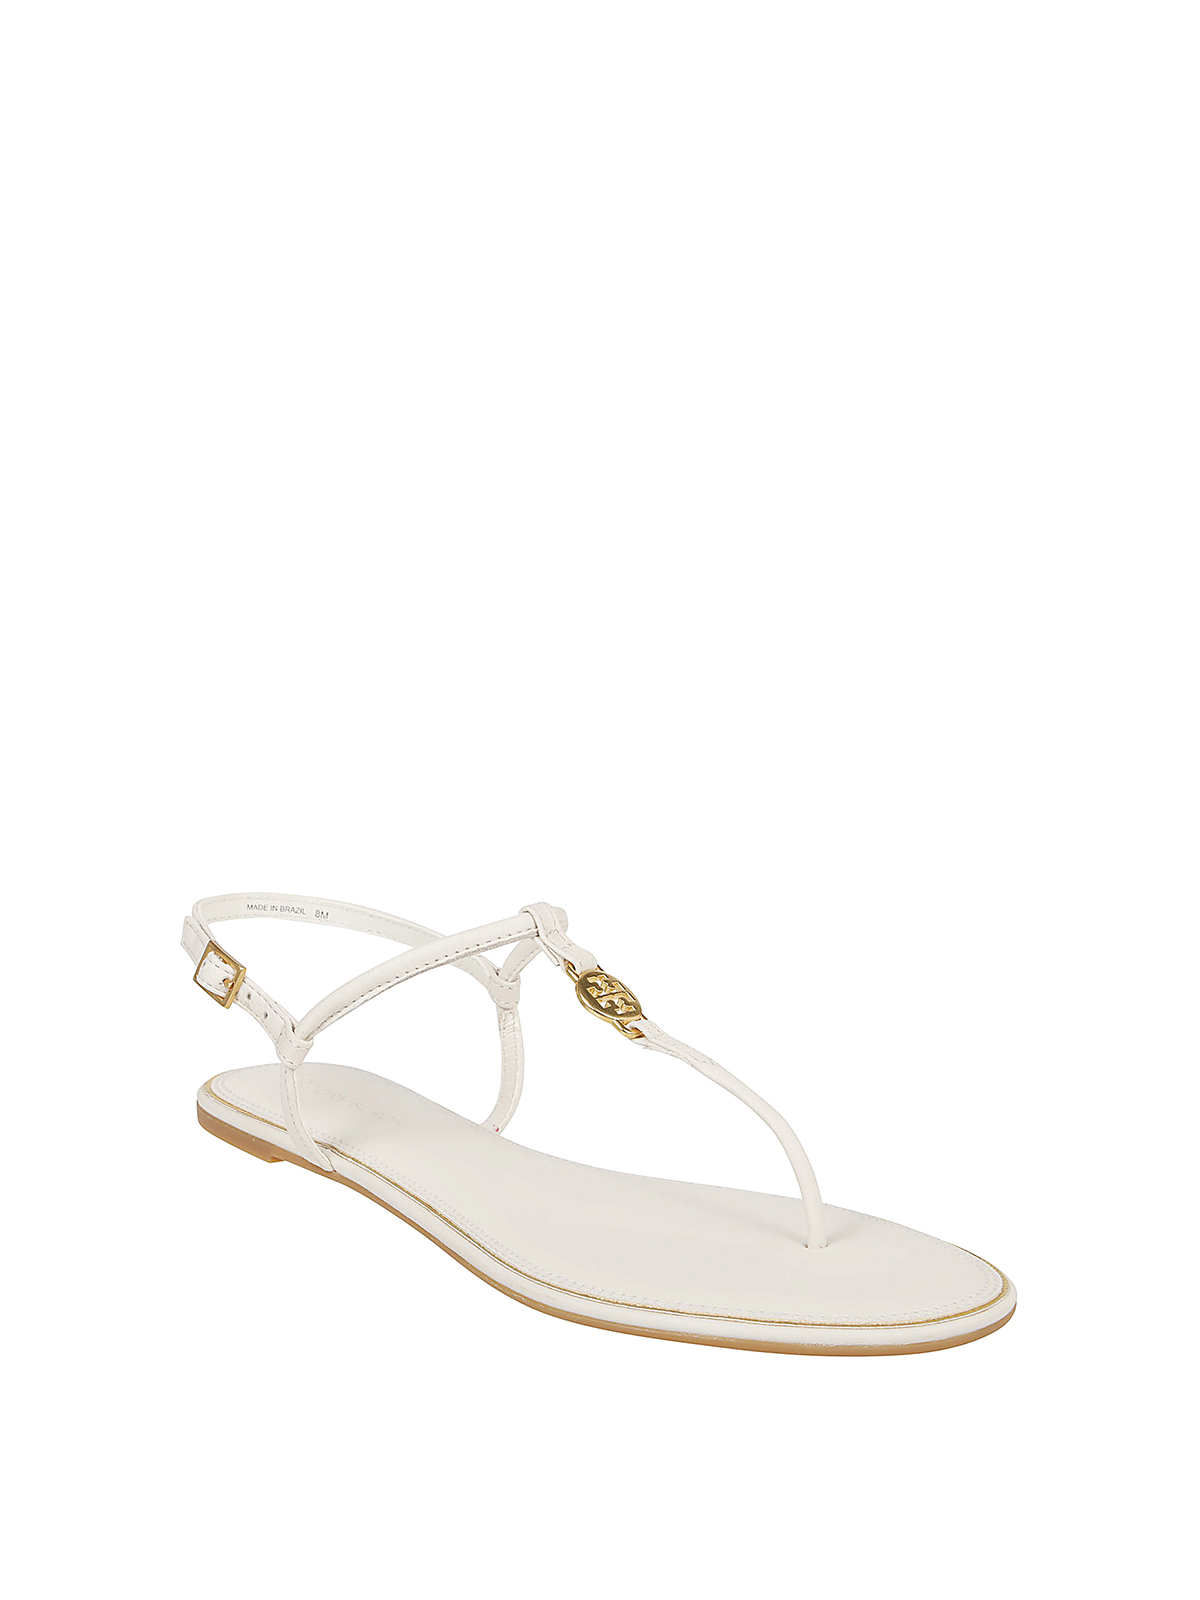 Sandals Tory Burch - Emmy leather thong sandals - 63407104 